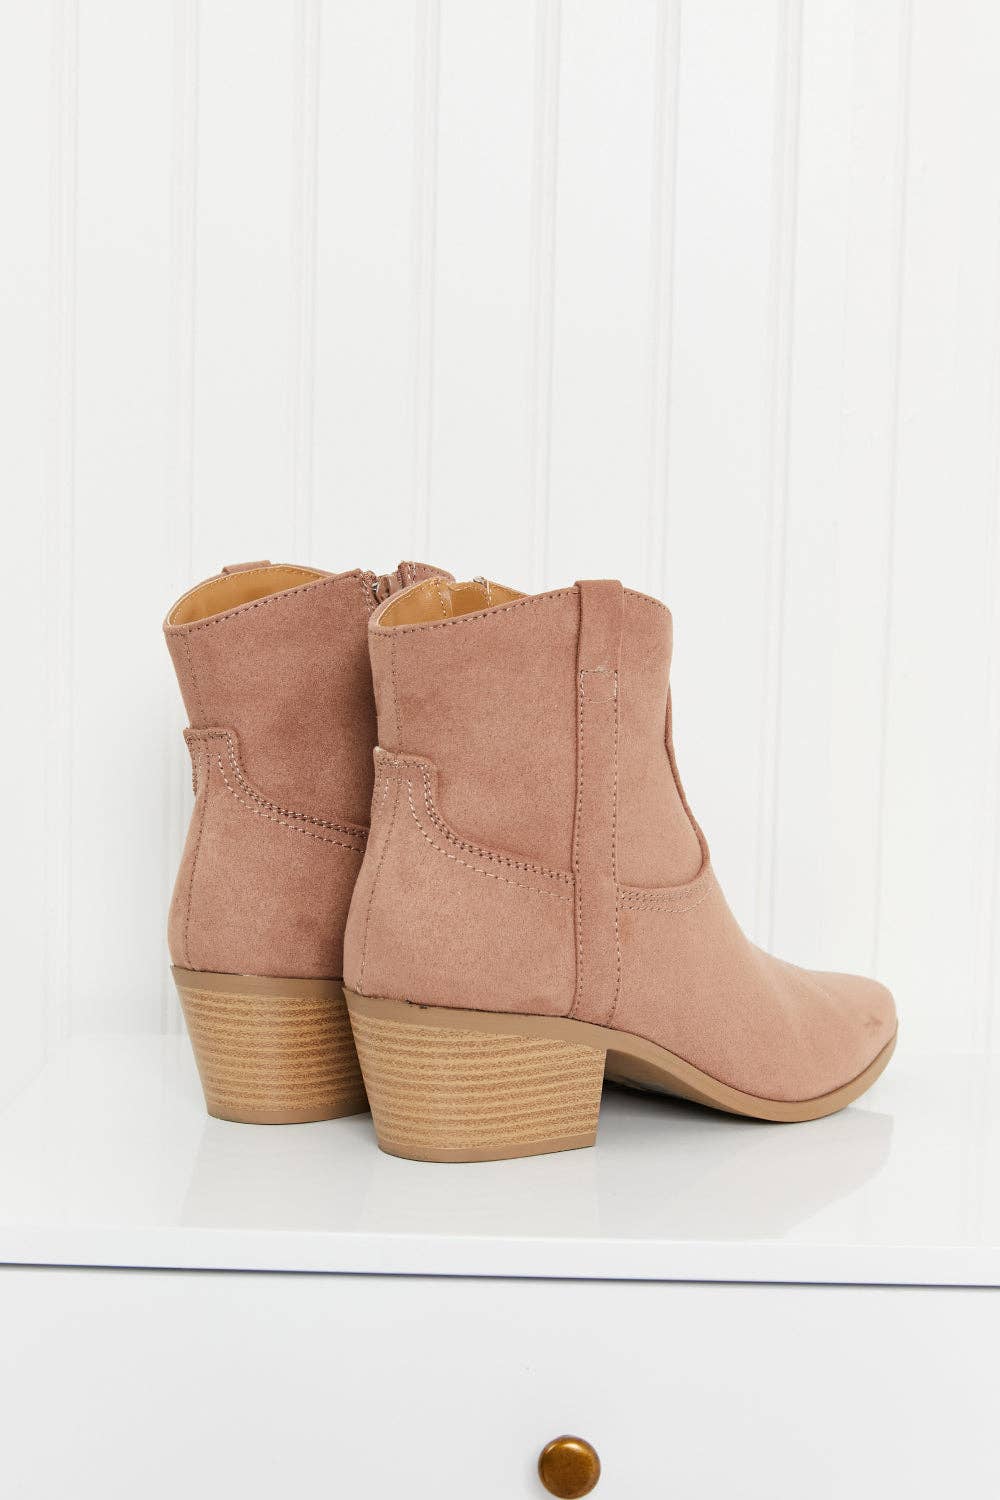 Concert Ready Fall Booties